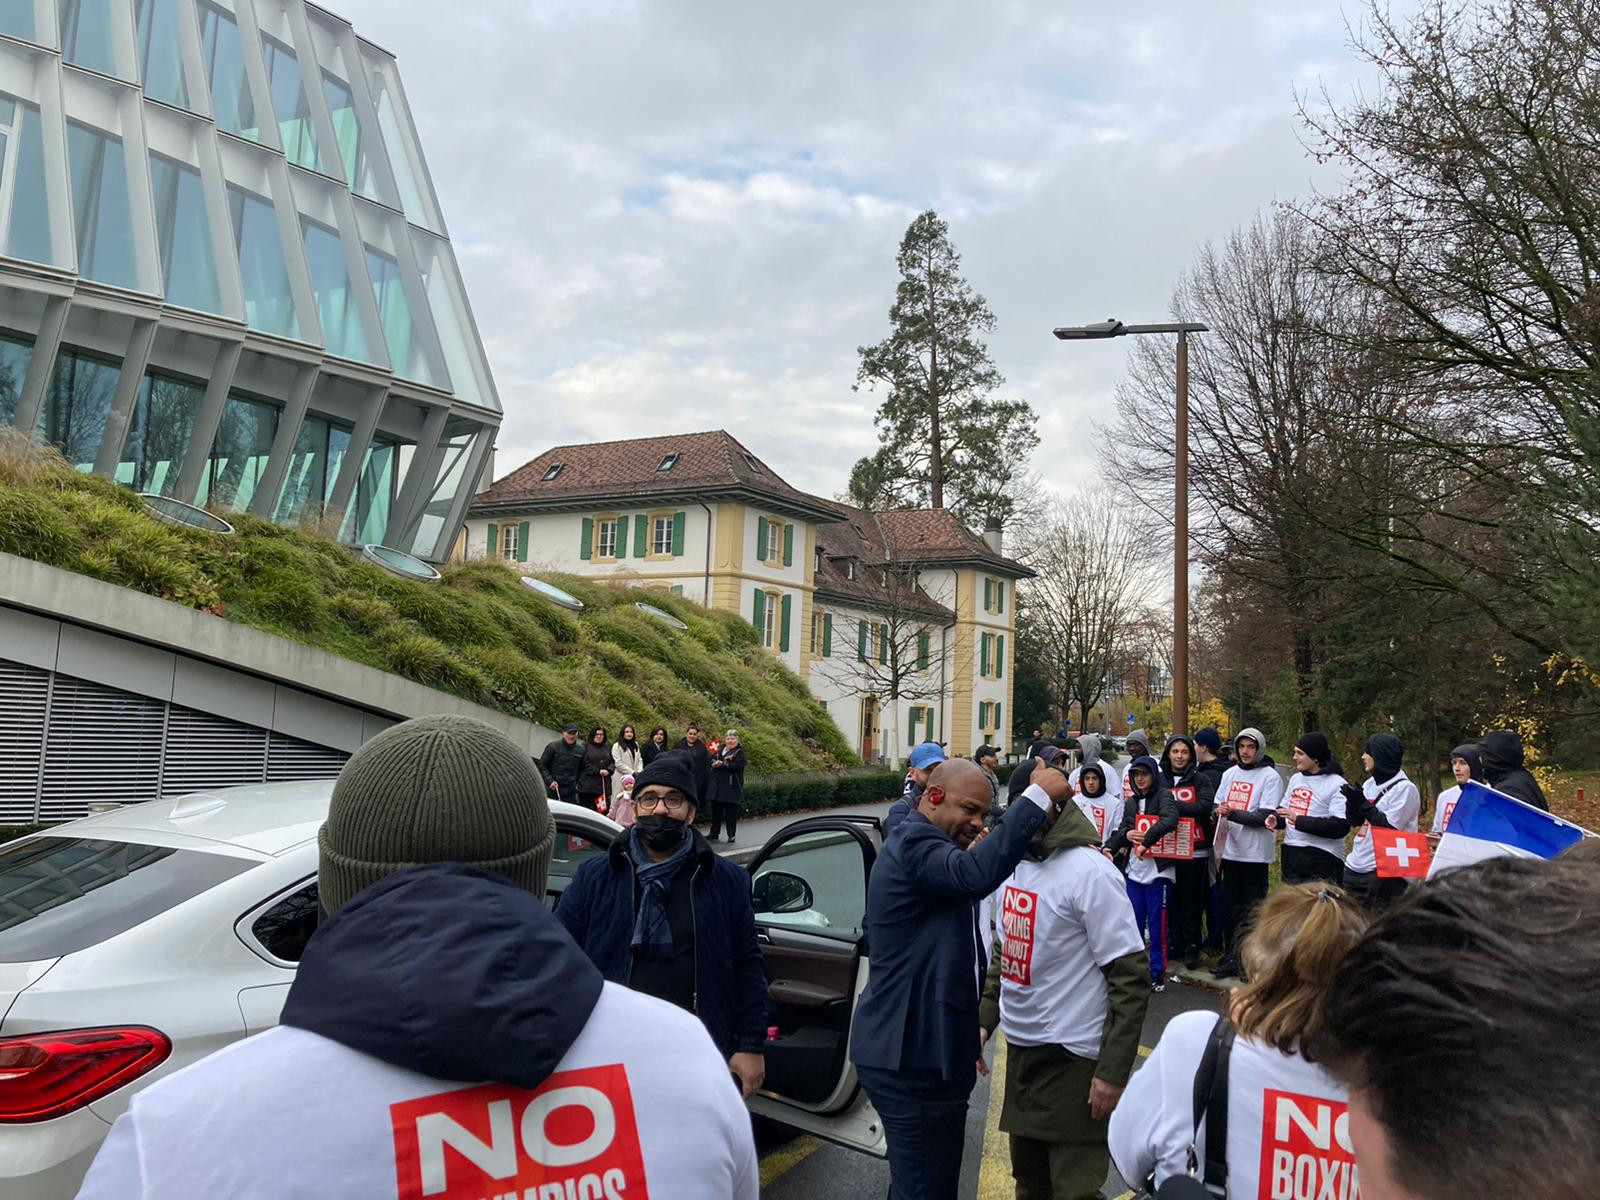 A protest led by former world champion Roy Jones Jr took place outside the IOC's headquarters this week, calling for boxing to remain in the Olympics ©ITG